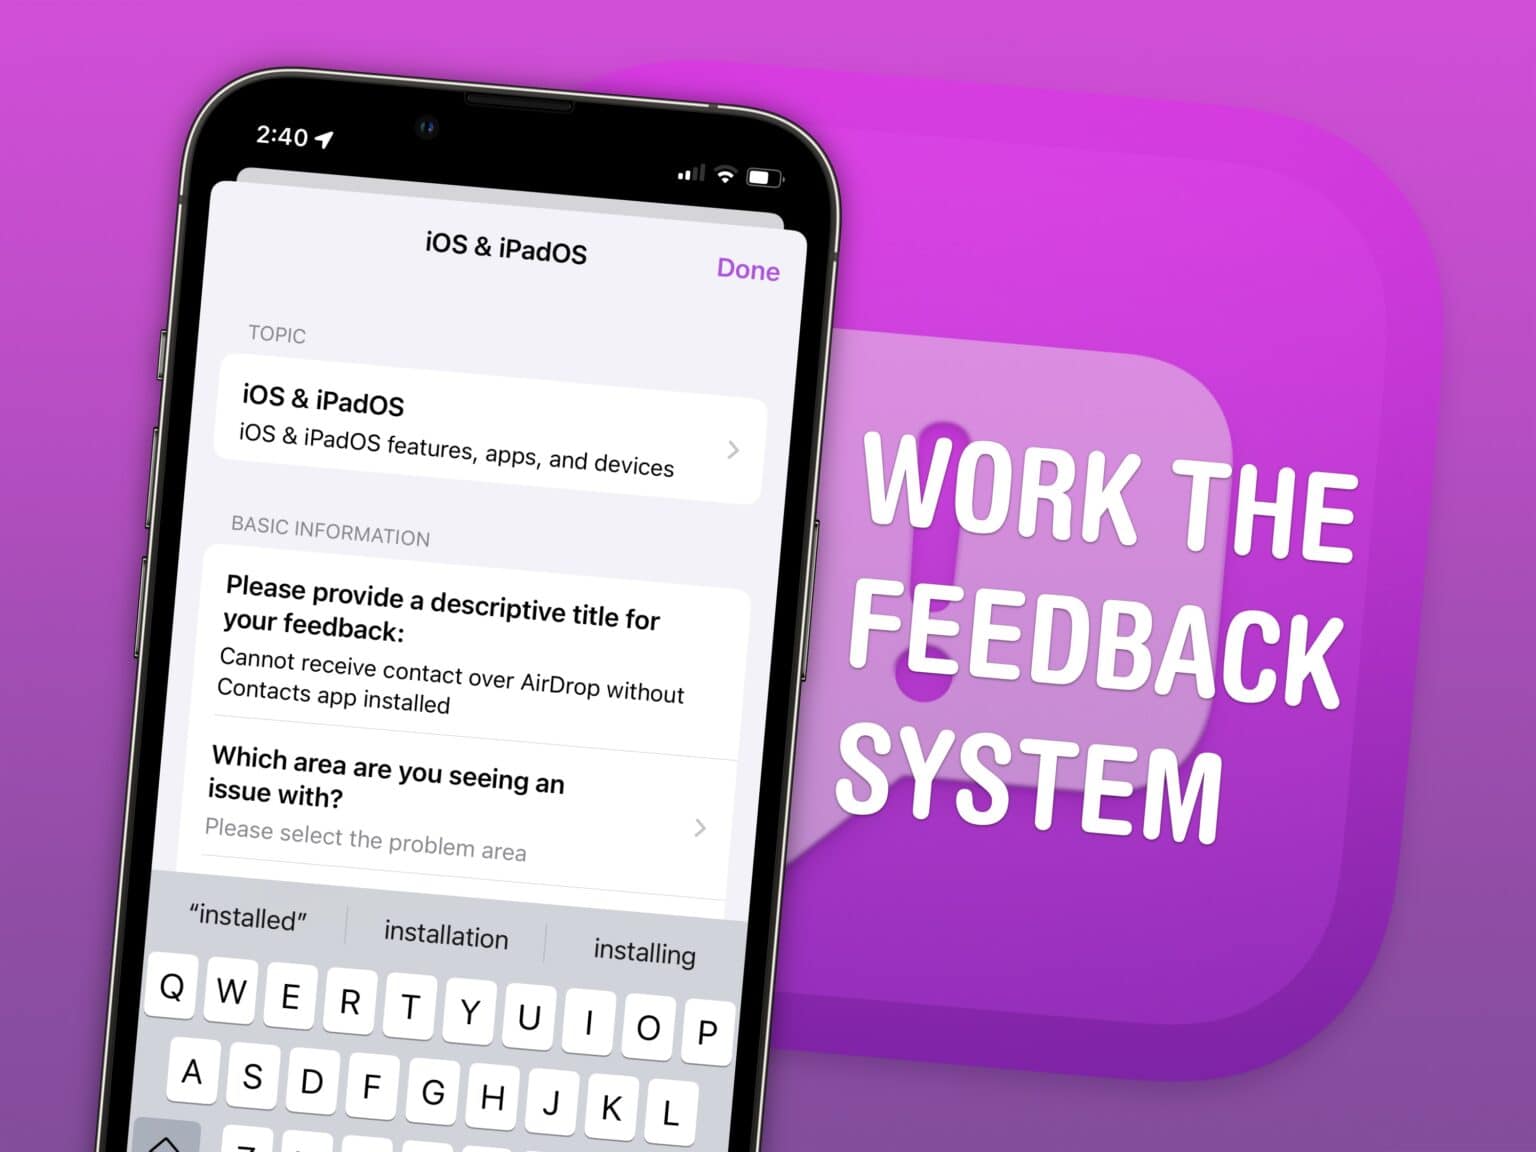 Text “Work the Feedback System” next to a screenshot of Feedback on iPhone